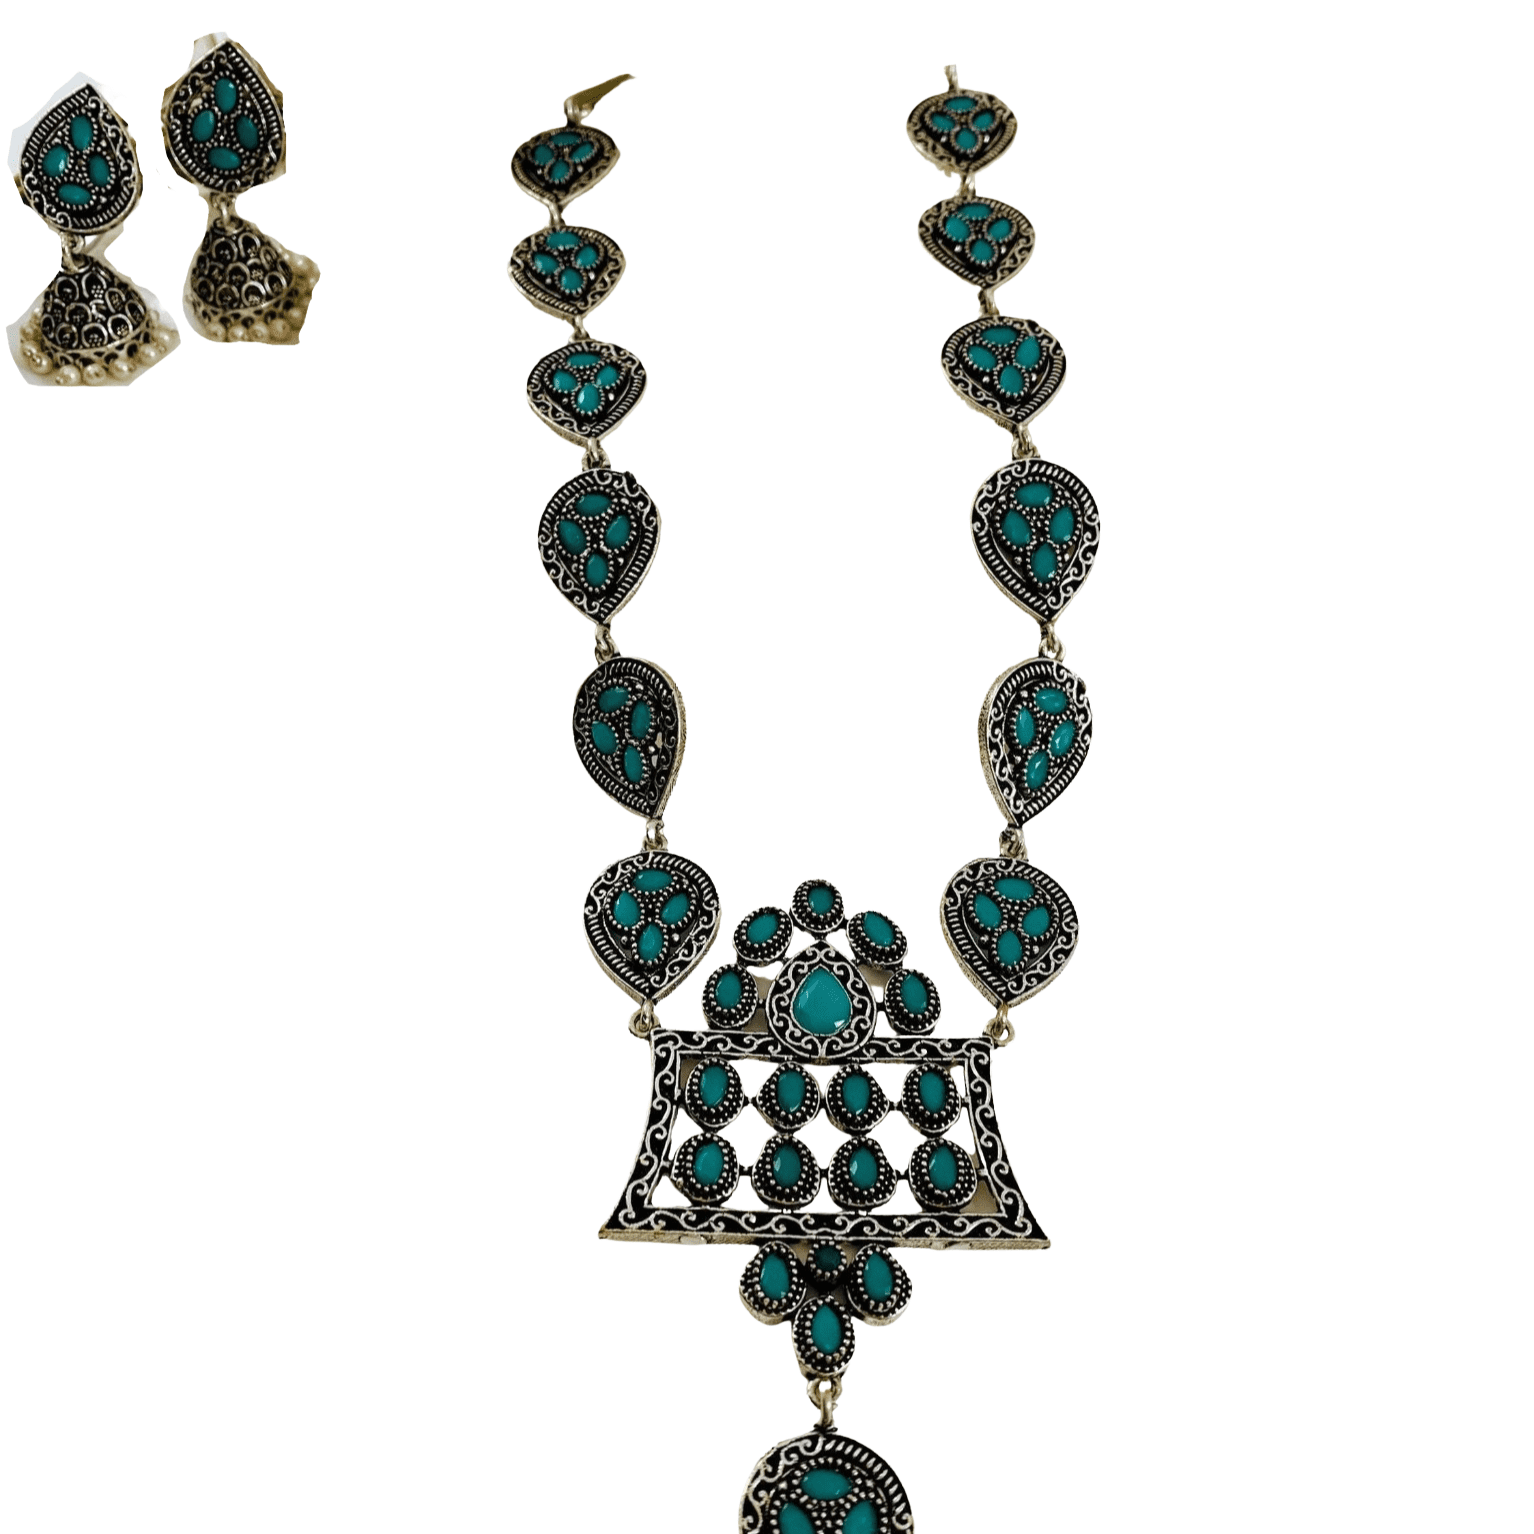 Details about   Afghan Traditional Hand Made Jewelry Set Afghan Jewelry Set Afghan Earrings 